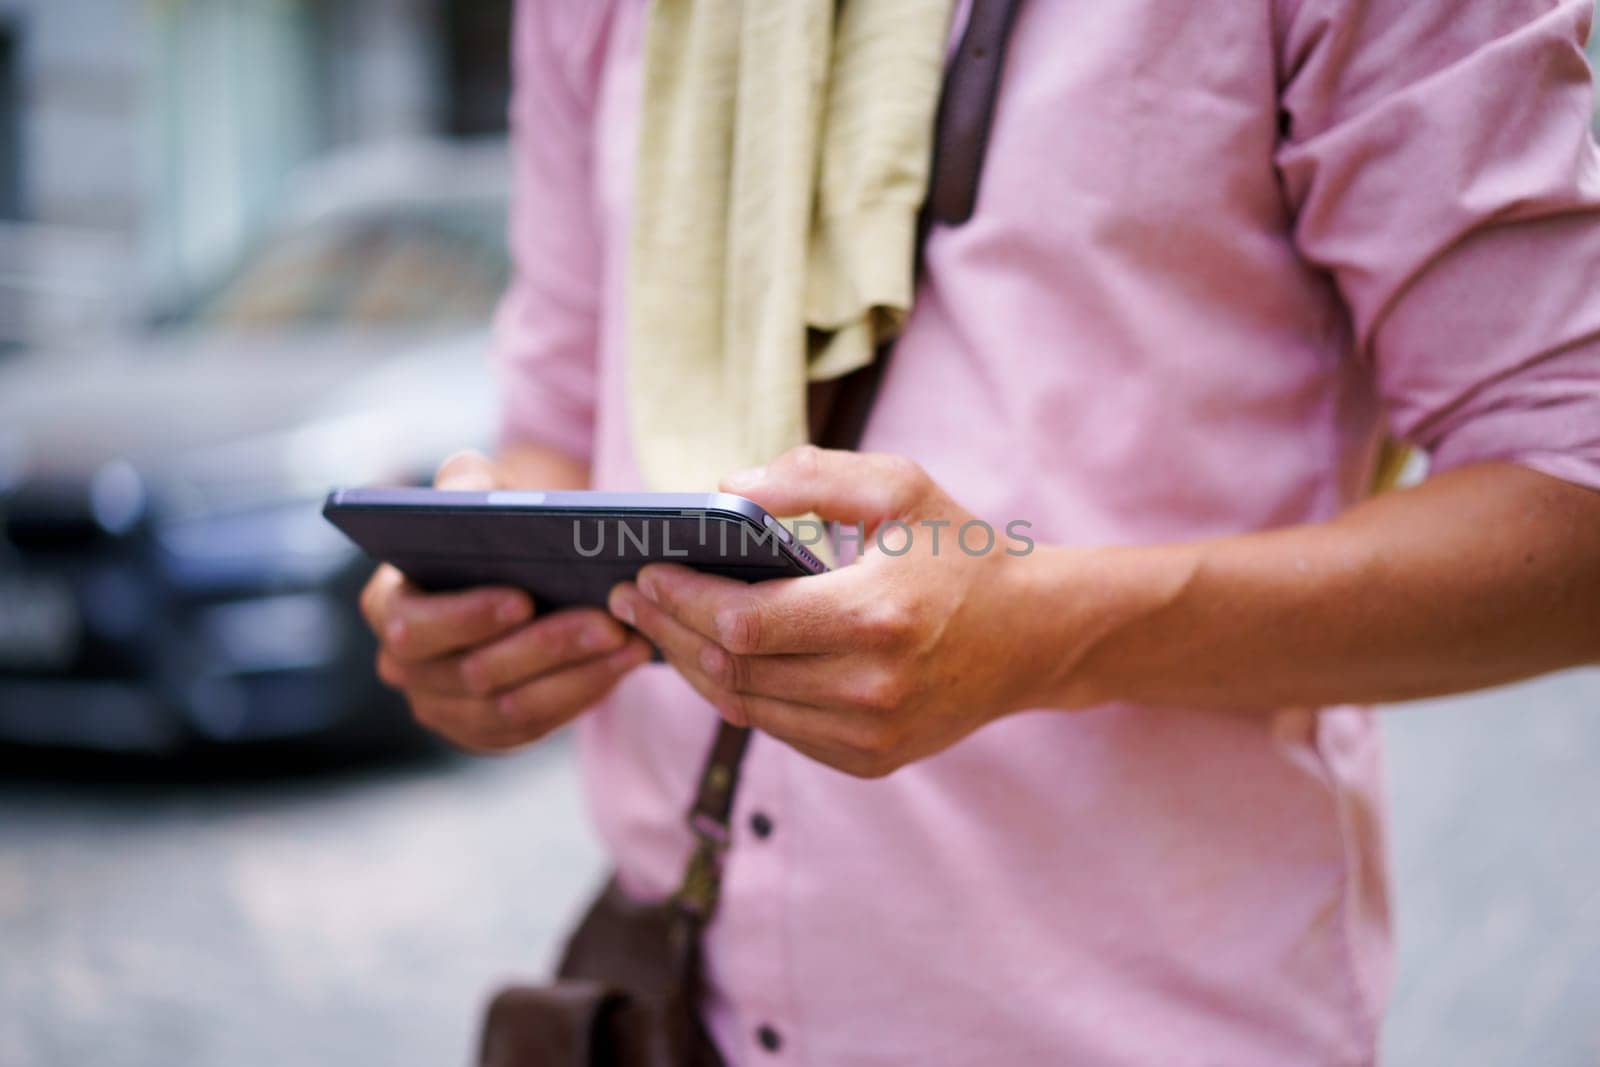 Close-up image, concept of digital communication comes to life as man's hands expertly hold tablet PC on bustling city street. Close-up perspective highlights details of touchscreen device, emphasizing its role in facilitating modern communication and information access. by LipikStockMedia